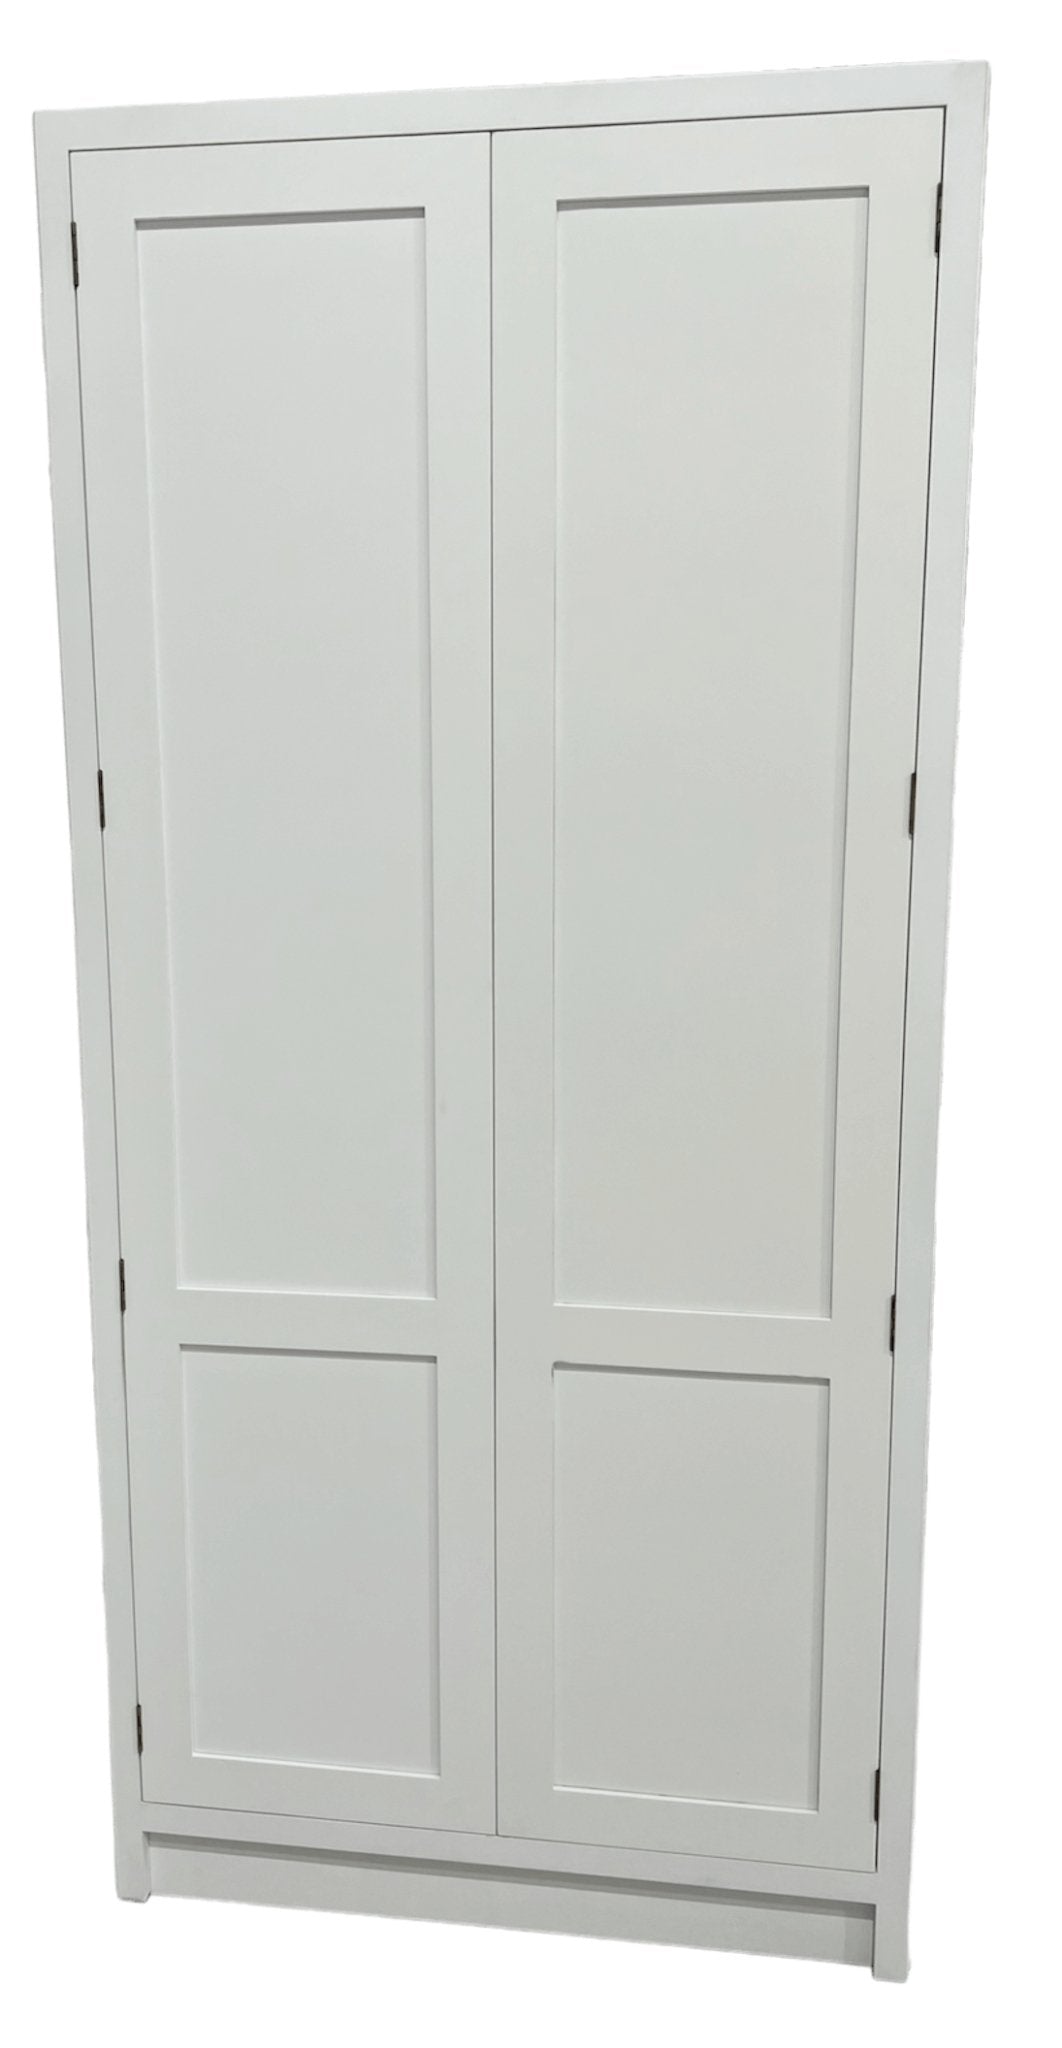 TL 1000 - 1000mm Wide Tall double door Larder - Classic Kitchens Direct